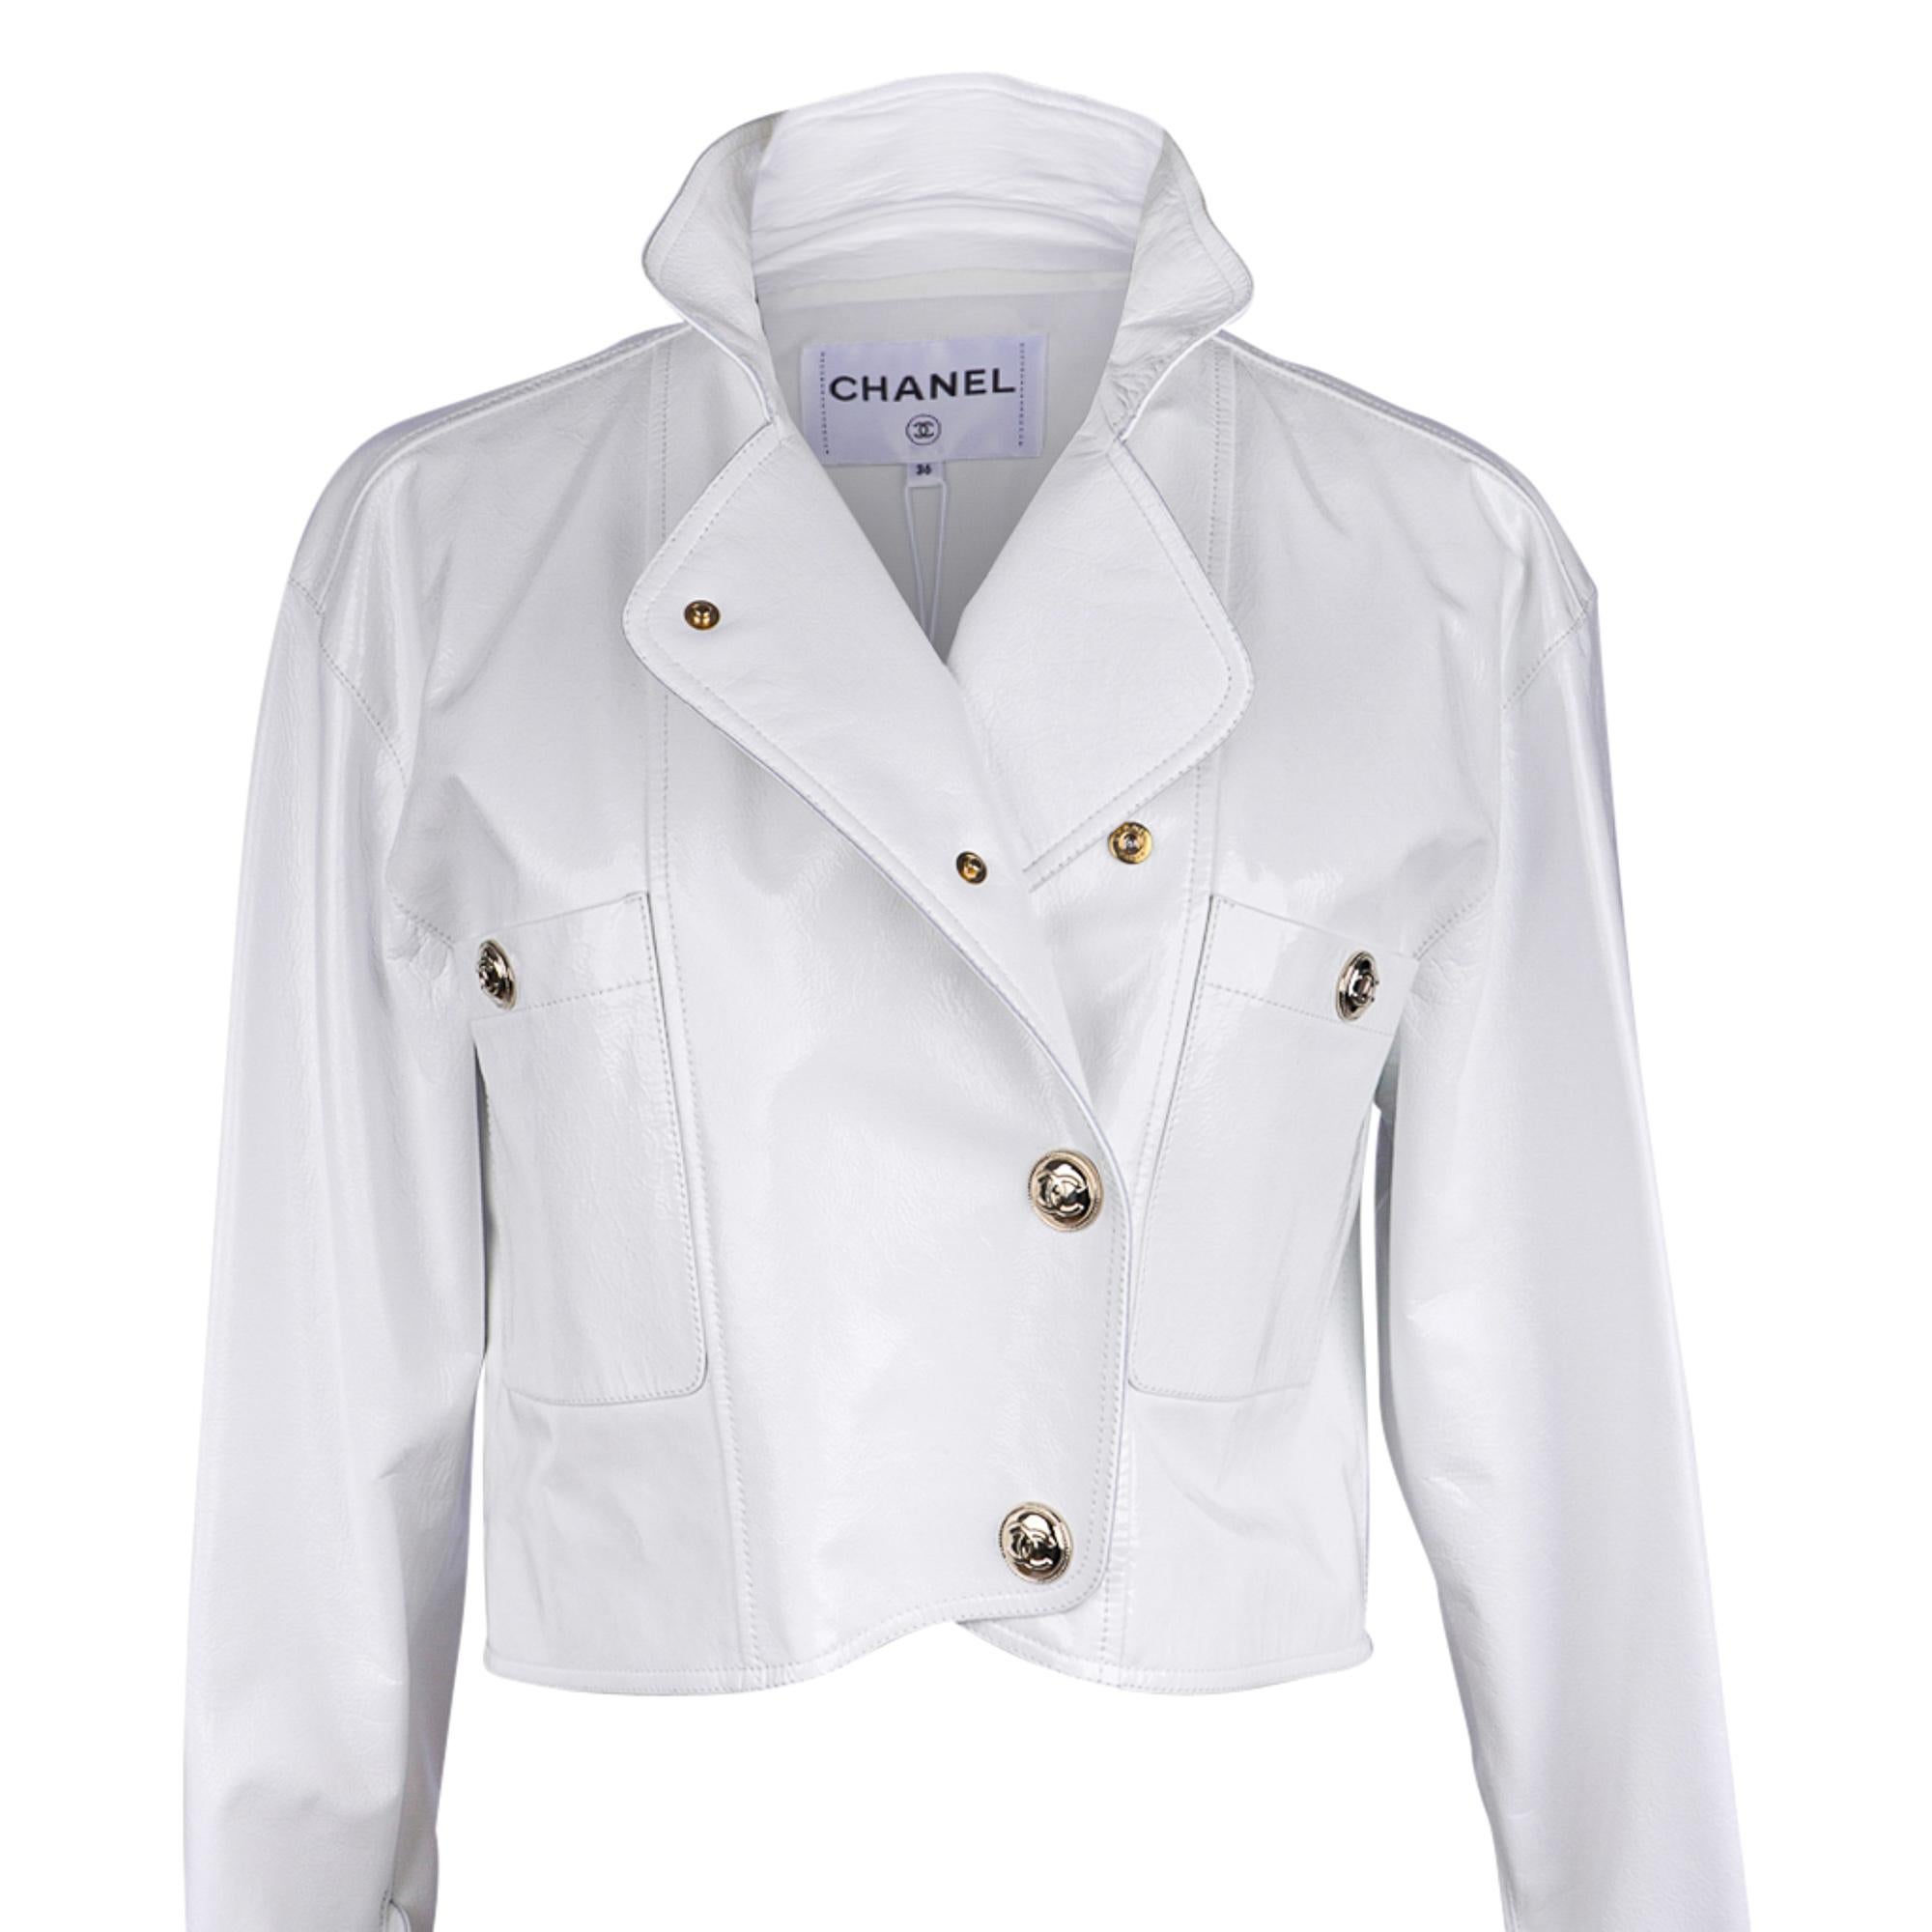 Chanel 2020-21FW Jacket White Patent Leather Short Biker Style 36 / 4 New w/Tags For Sale 1